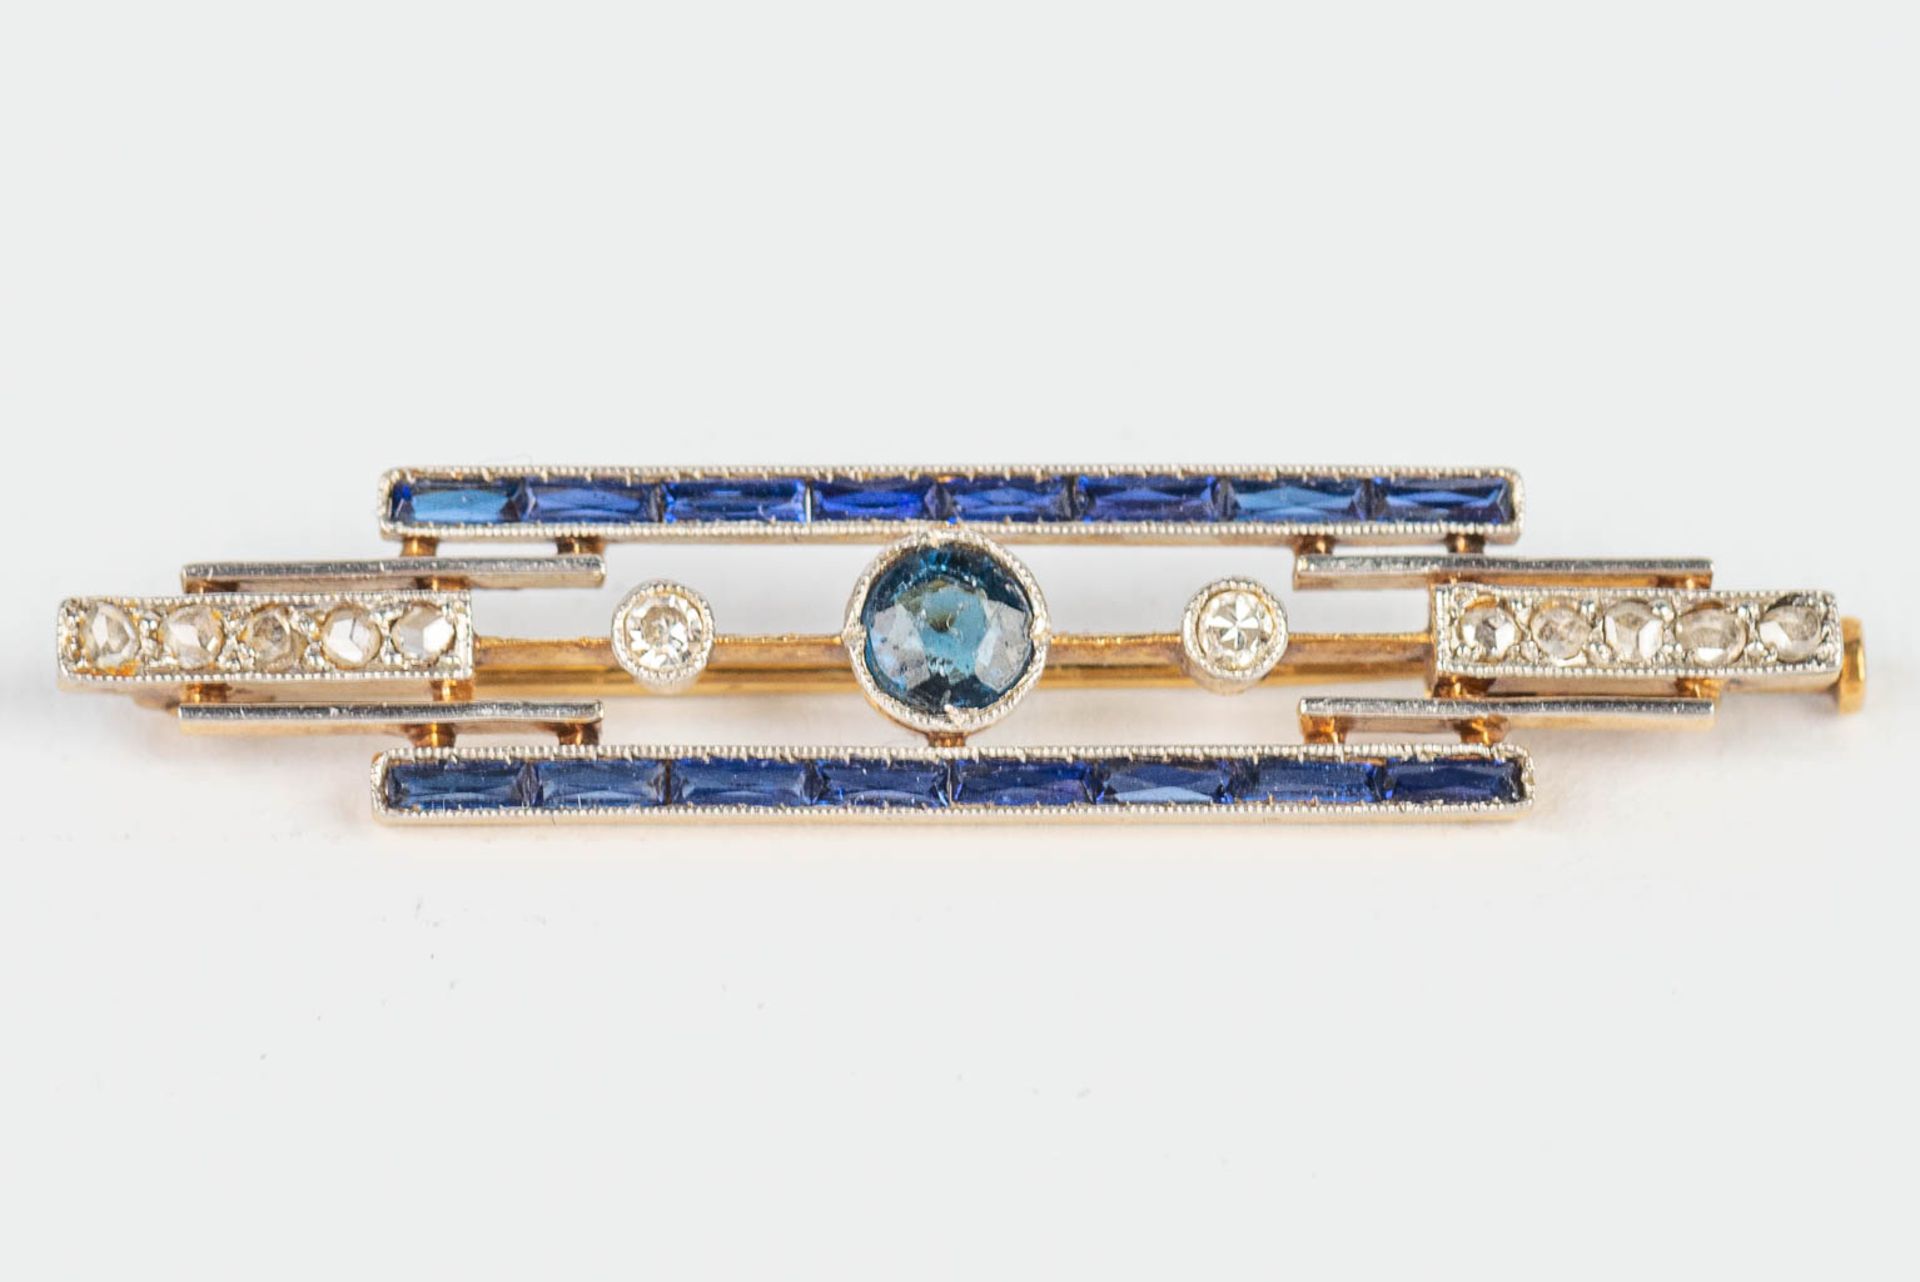 A small brooch made of yellow and white gold in art deco style, with blue sapphires. - Image 7 of 10